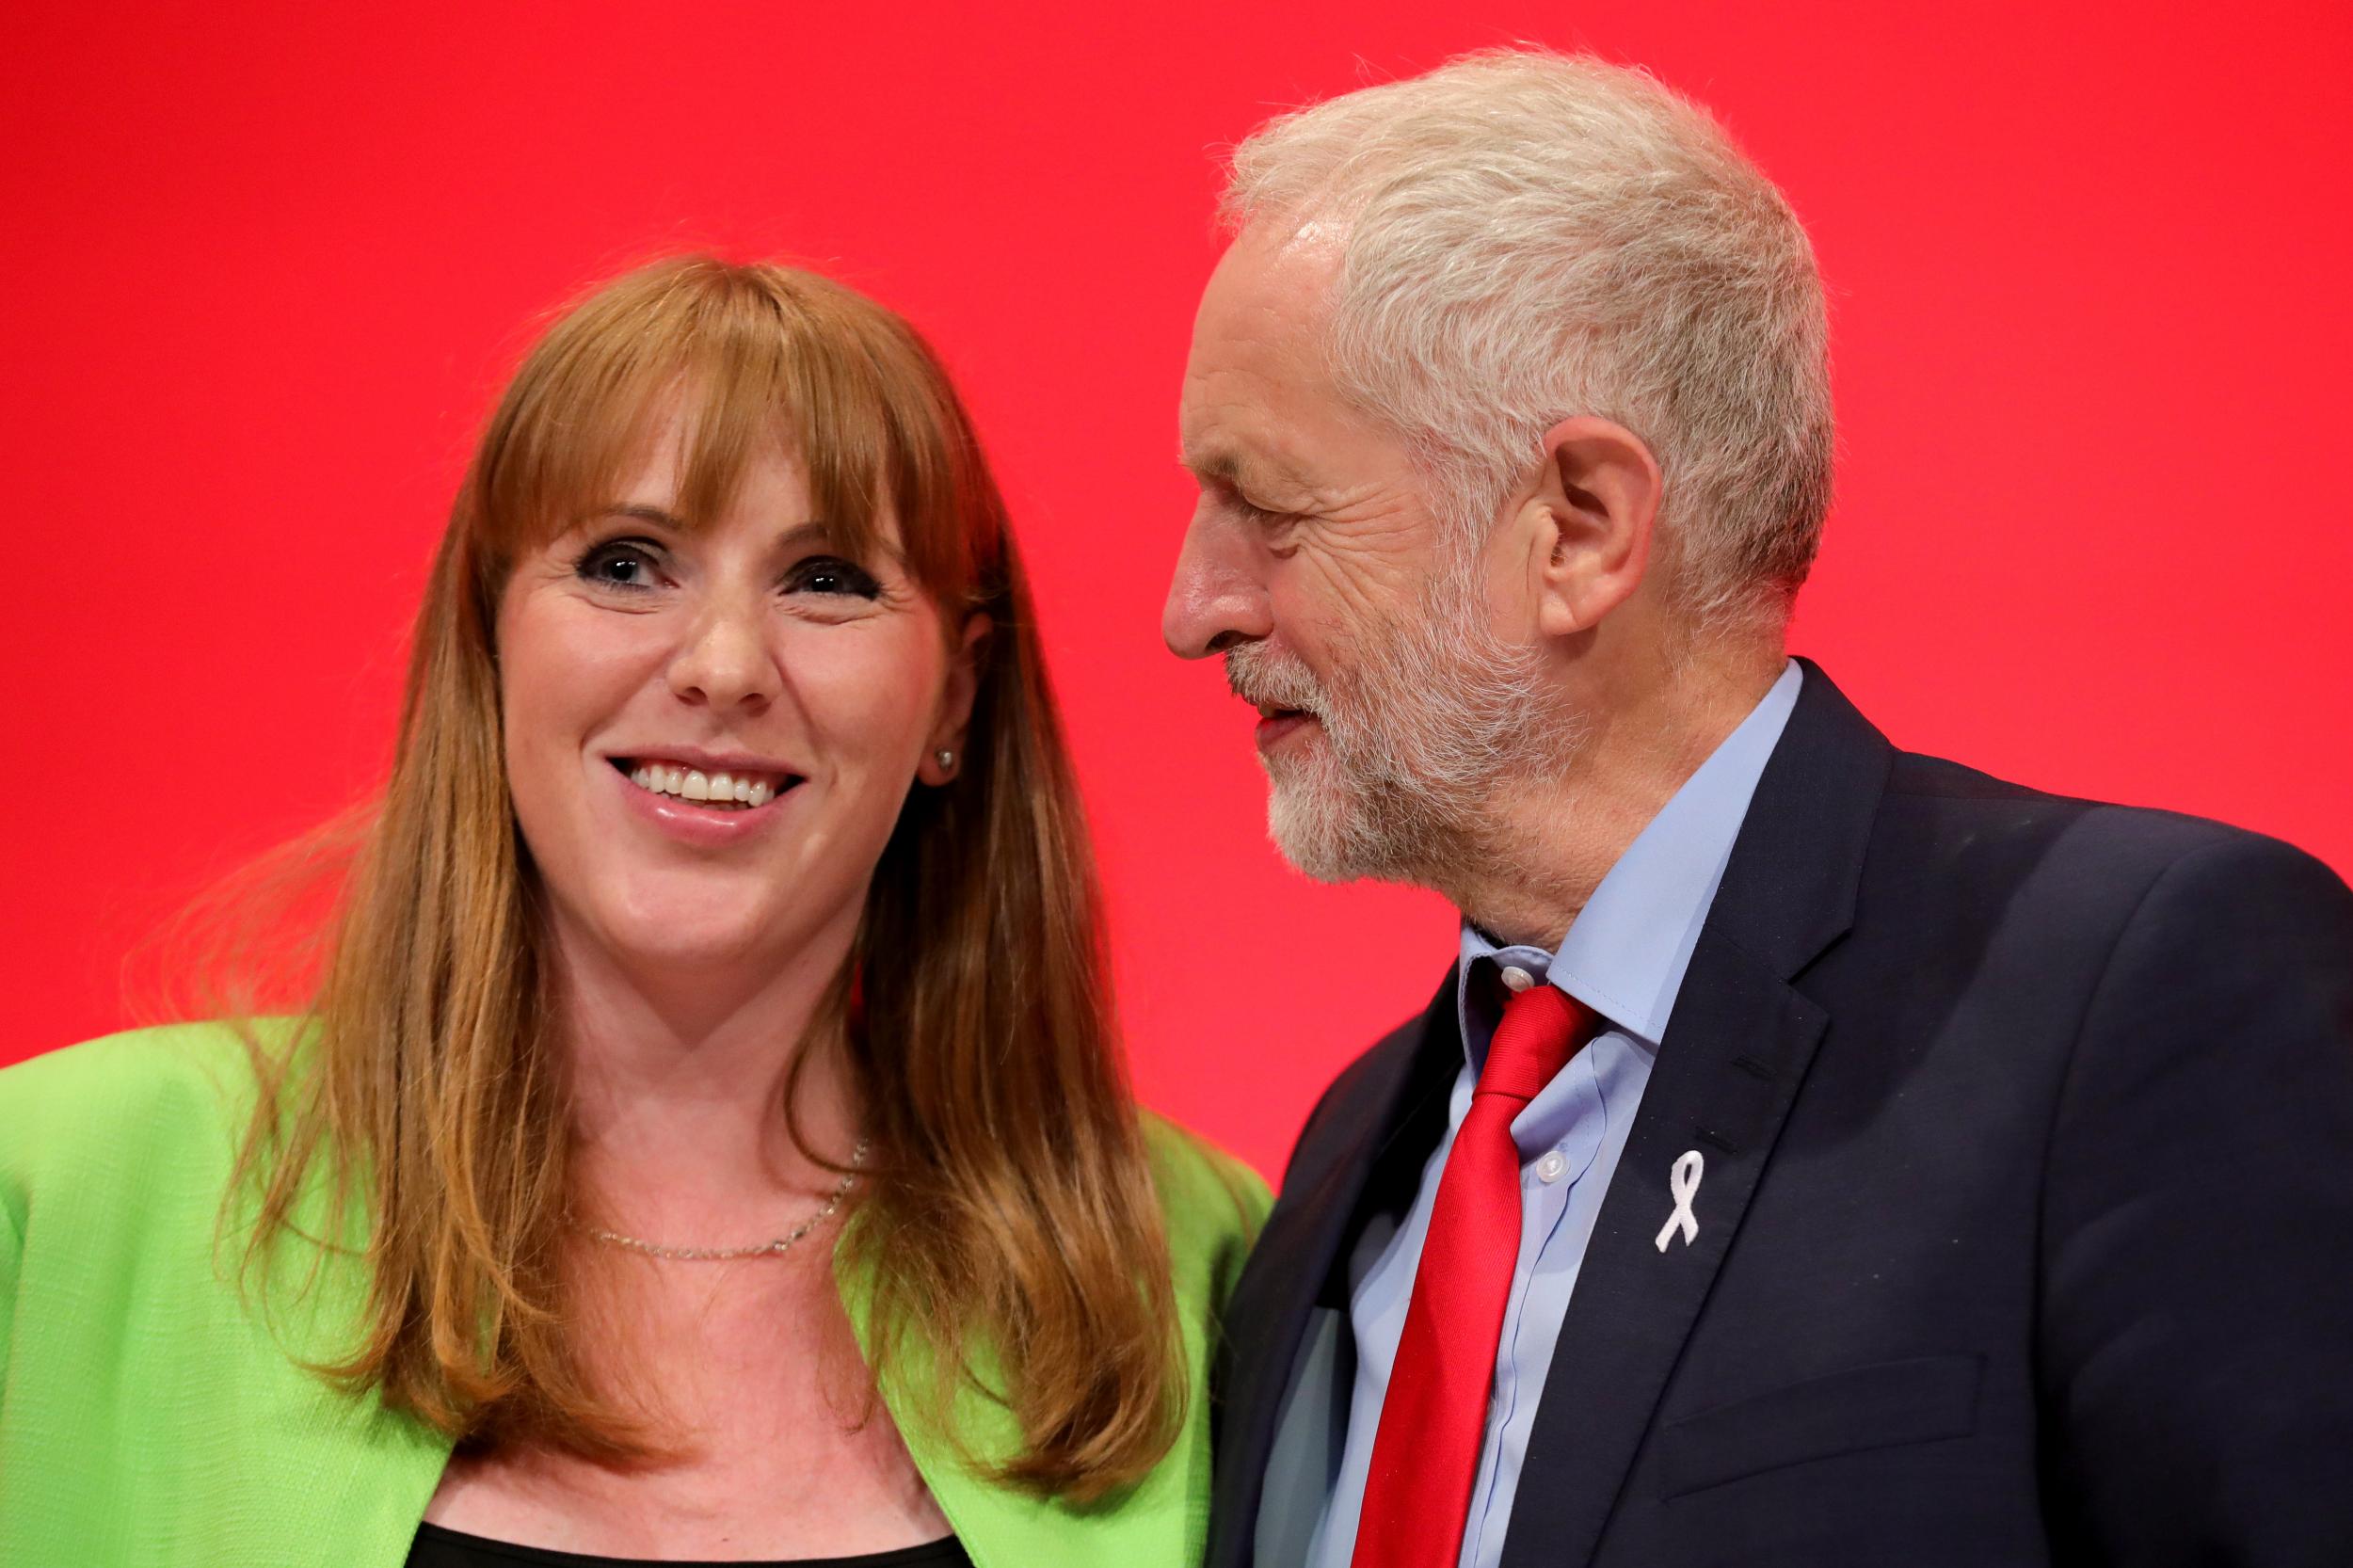 Angela Rayner says Labour 'will put money aside to make sure schools are safe'